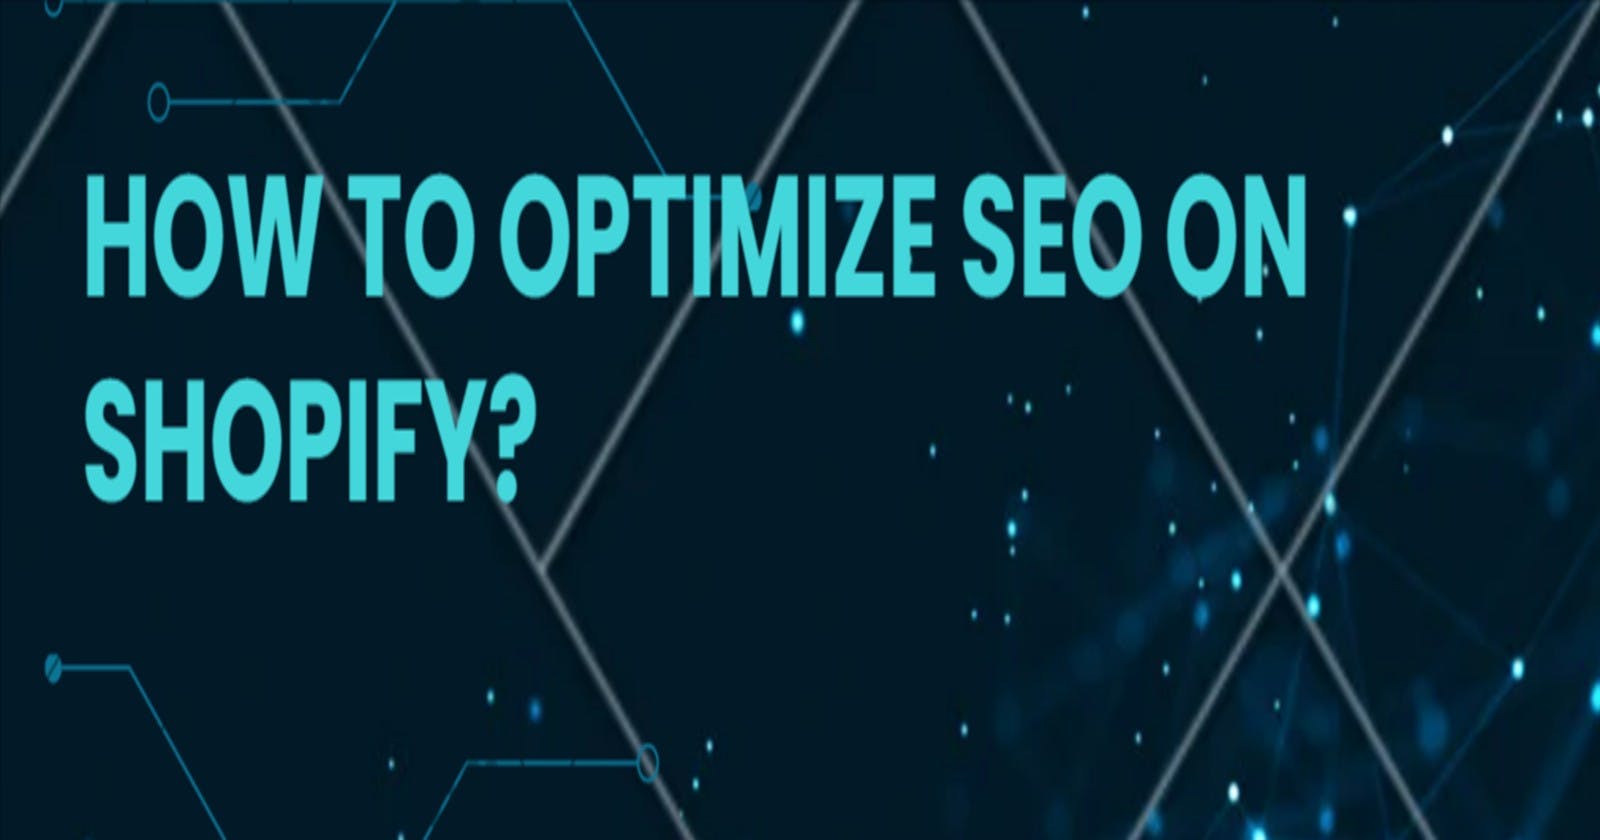 How to Optimize SEO on Shopify?